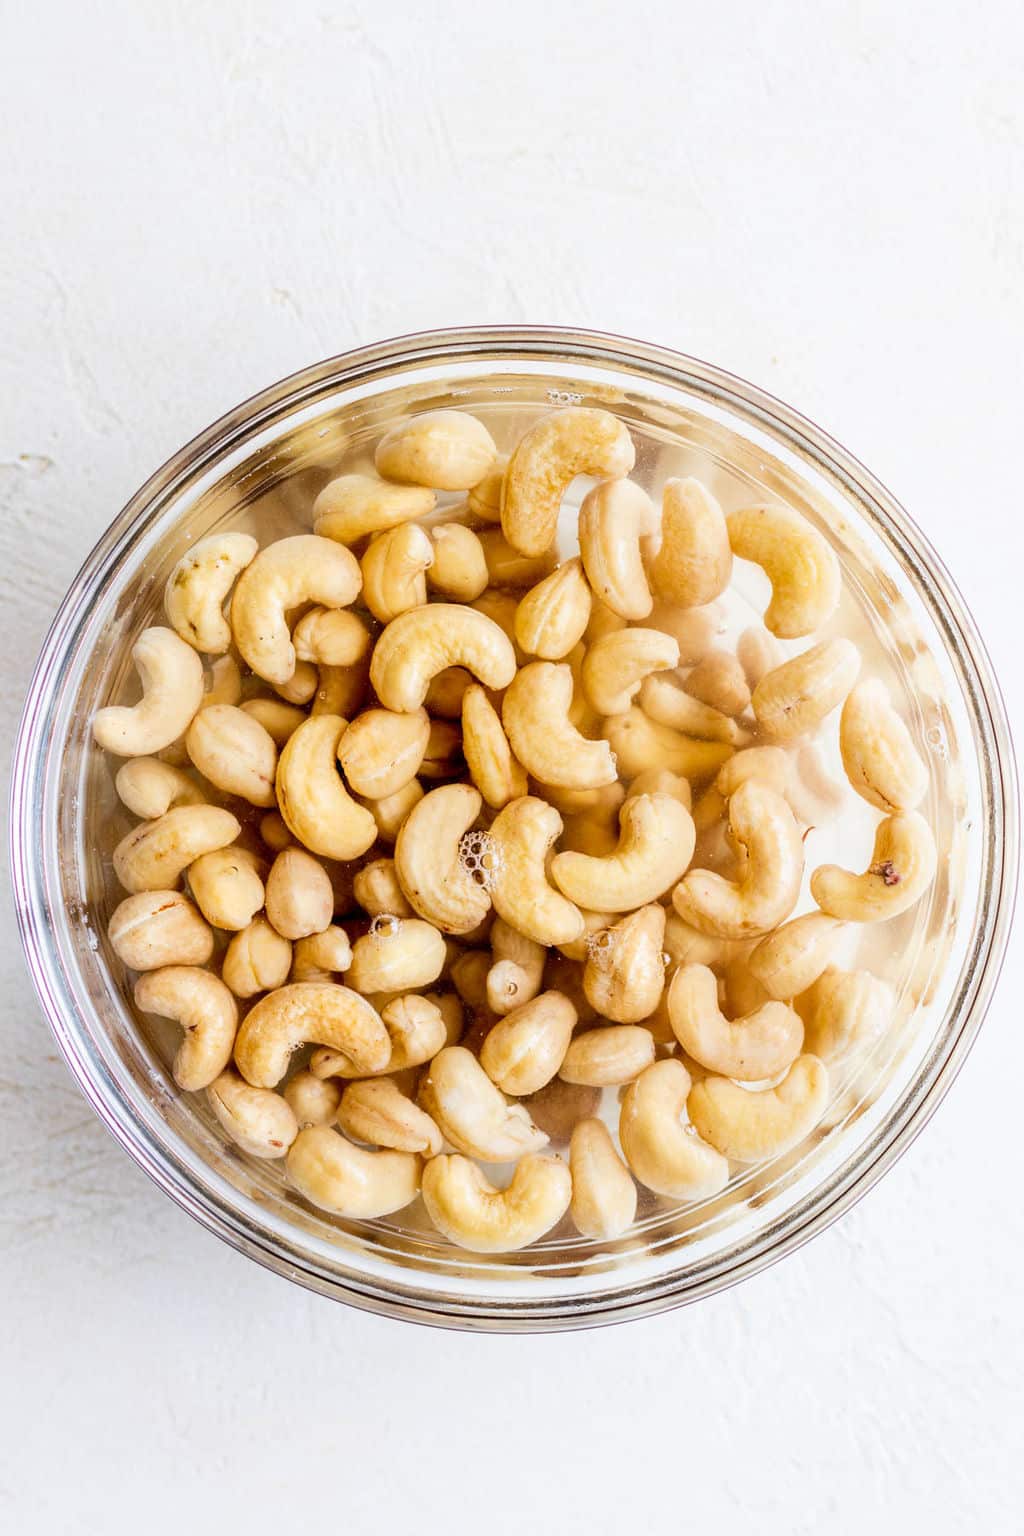 cashews submerged in water in a glass bowl.